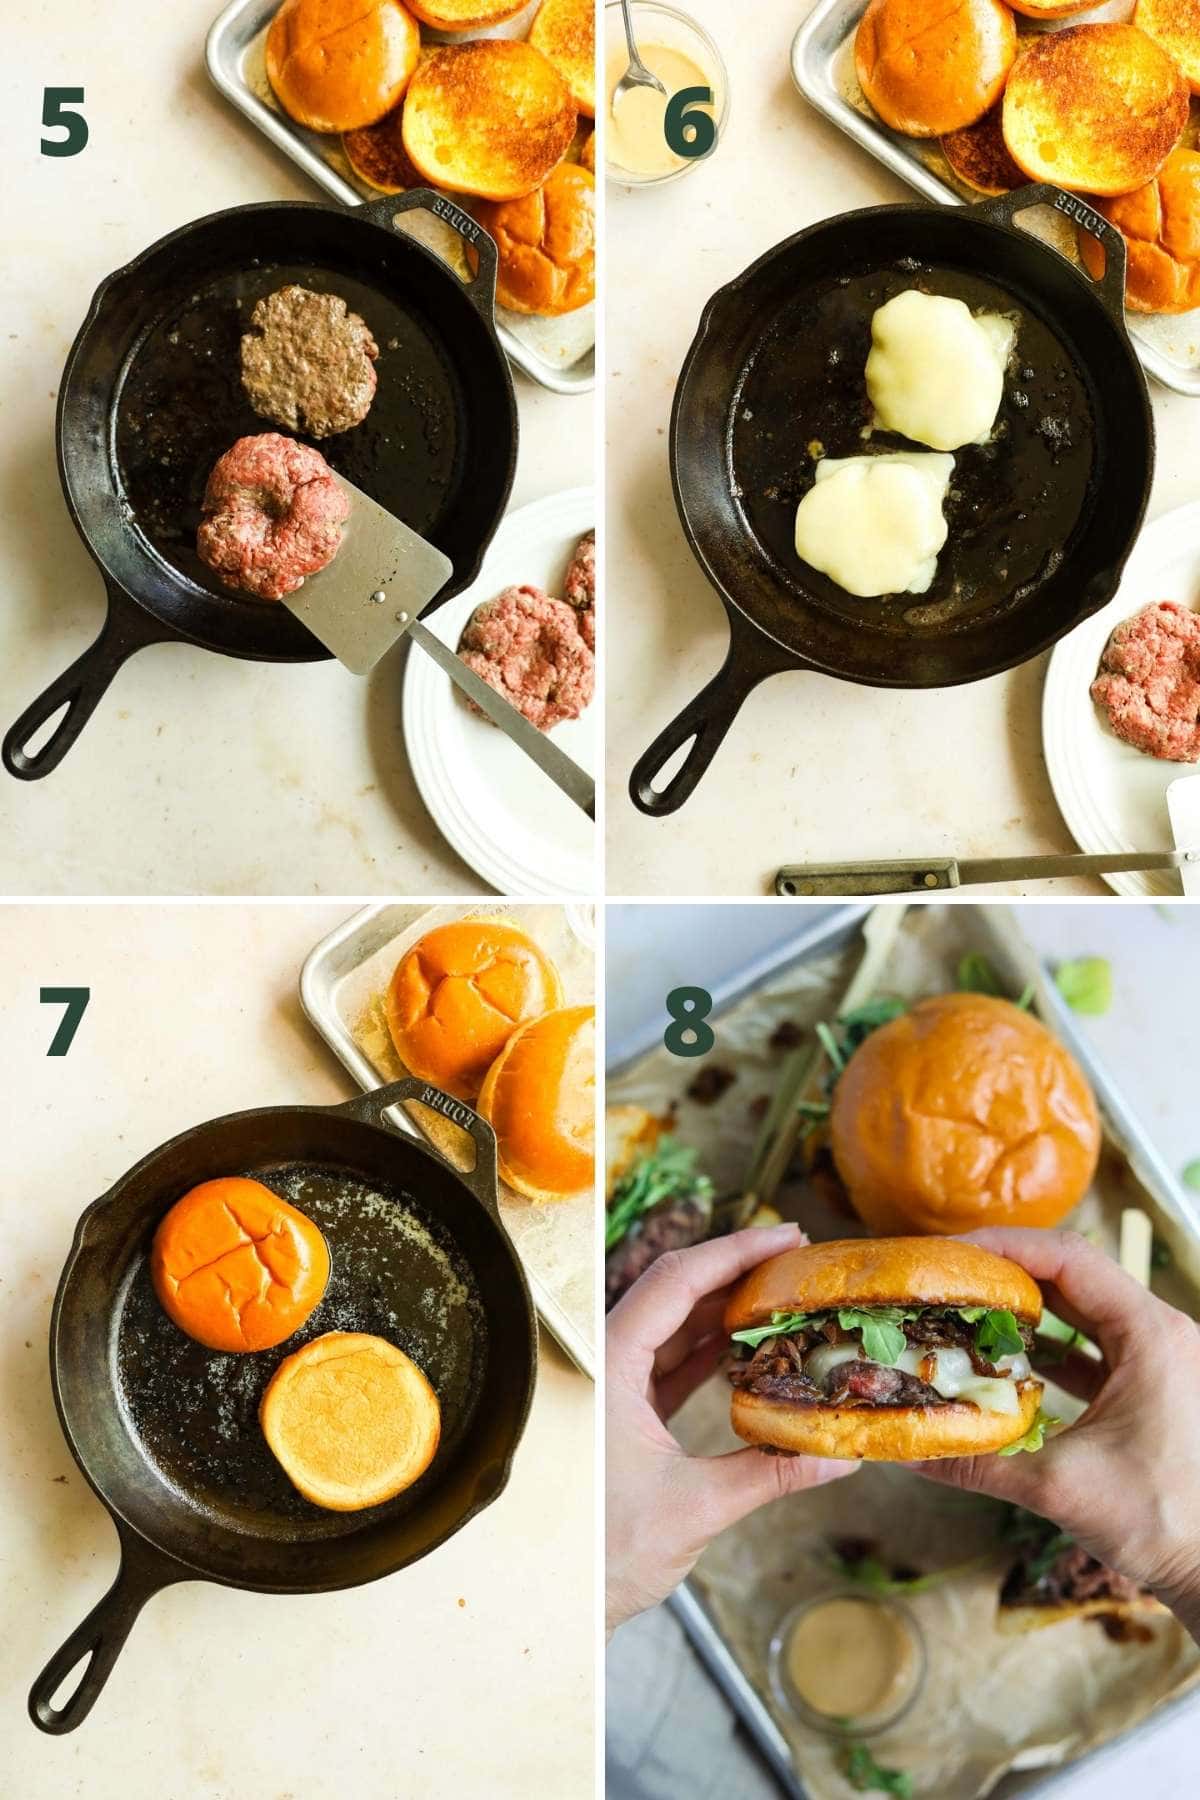 Steps to sear wagyu patties, melt cheese, and toast buns.